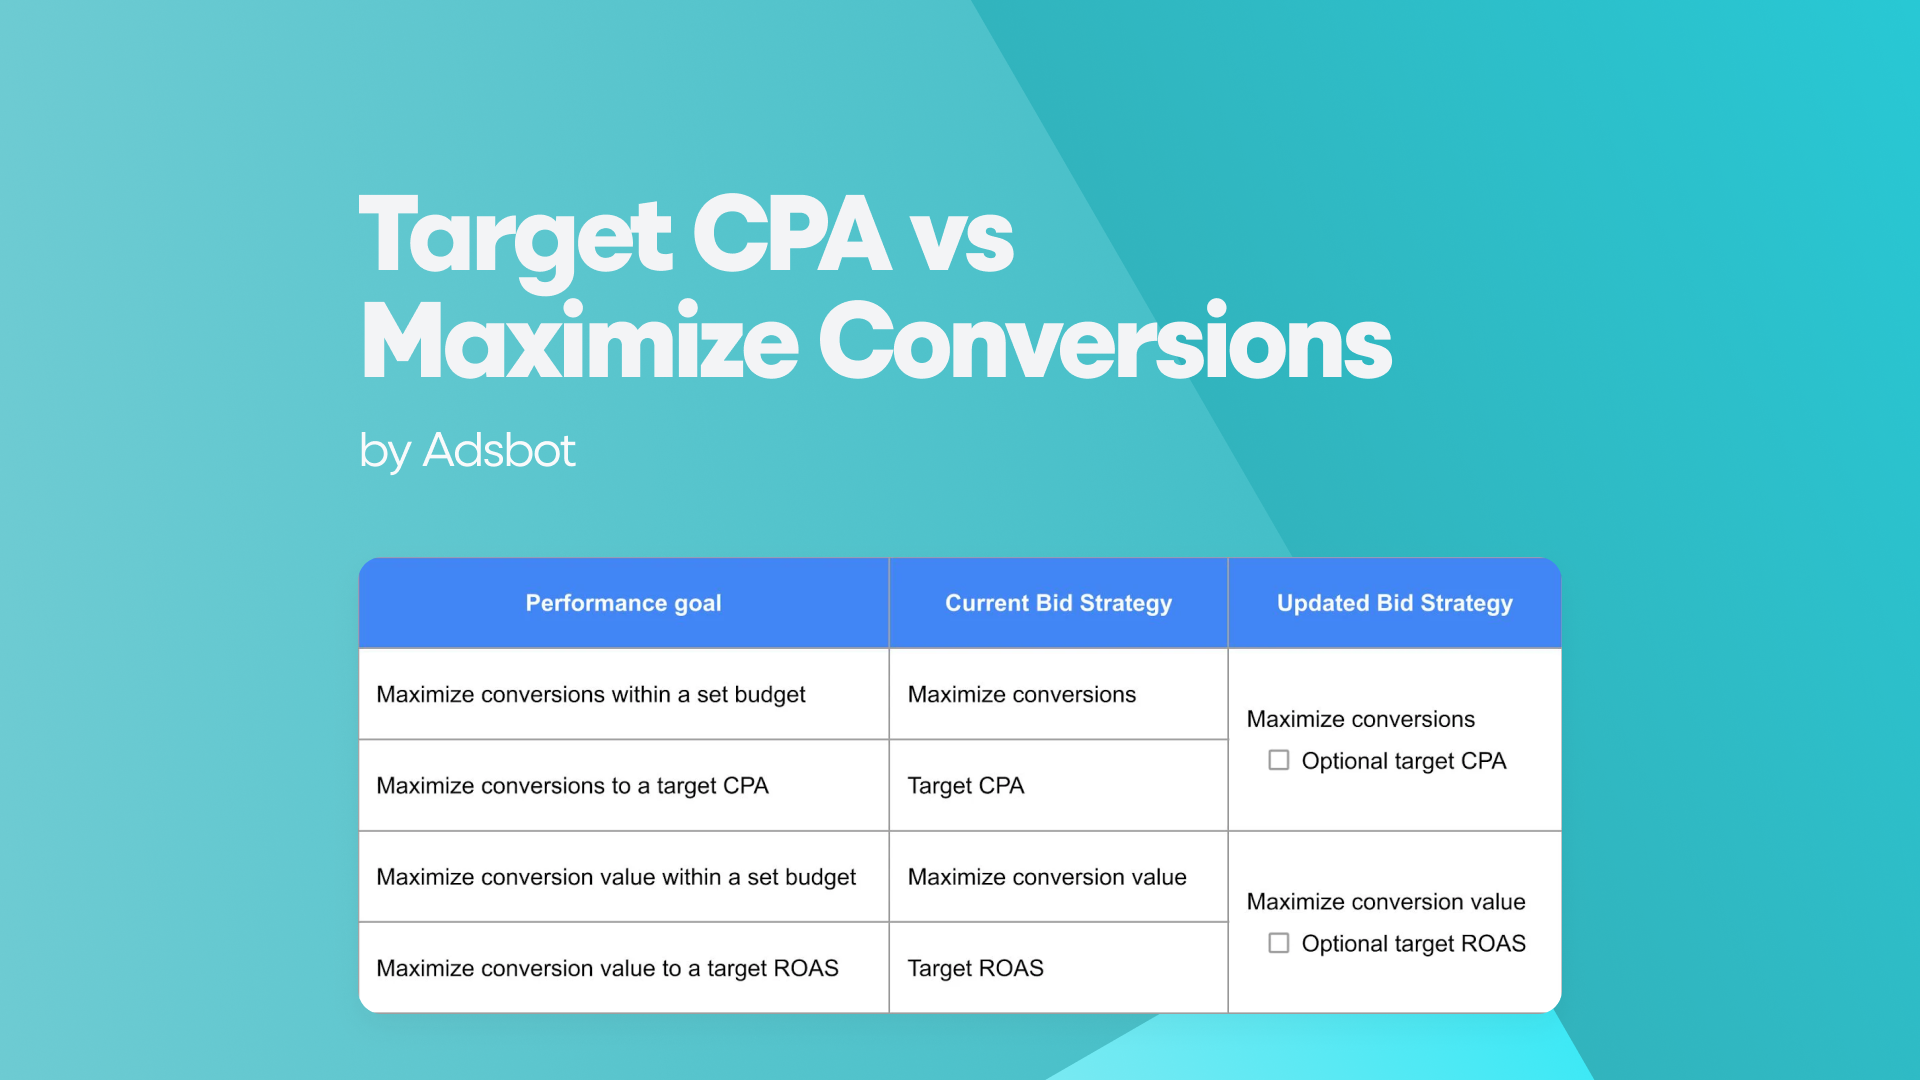 Target CPA vs Maximize Conversions in ads